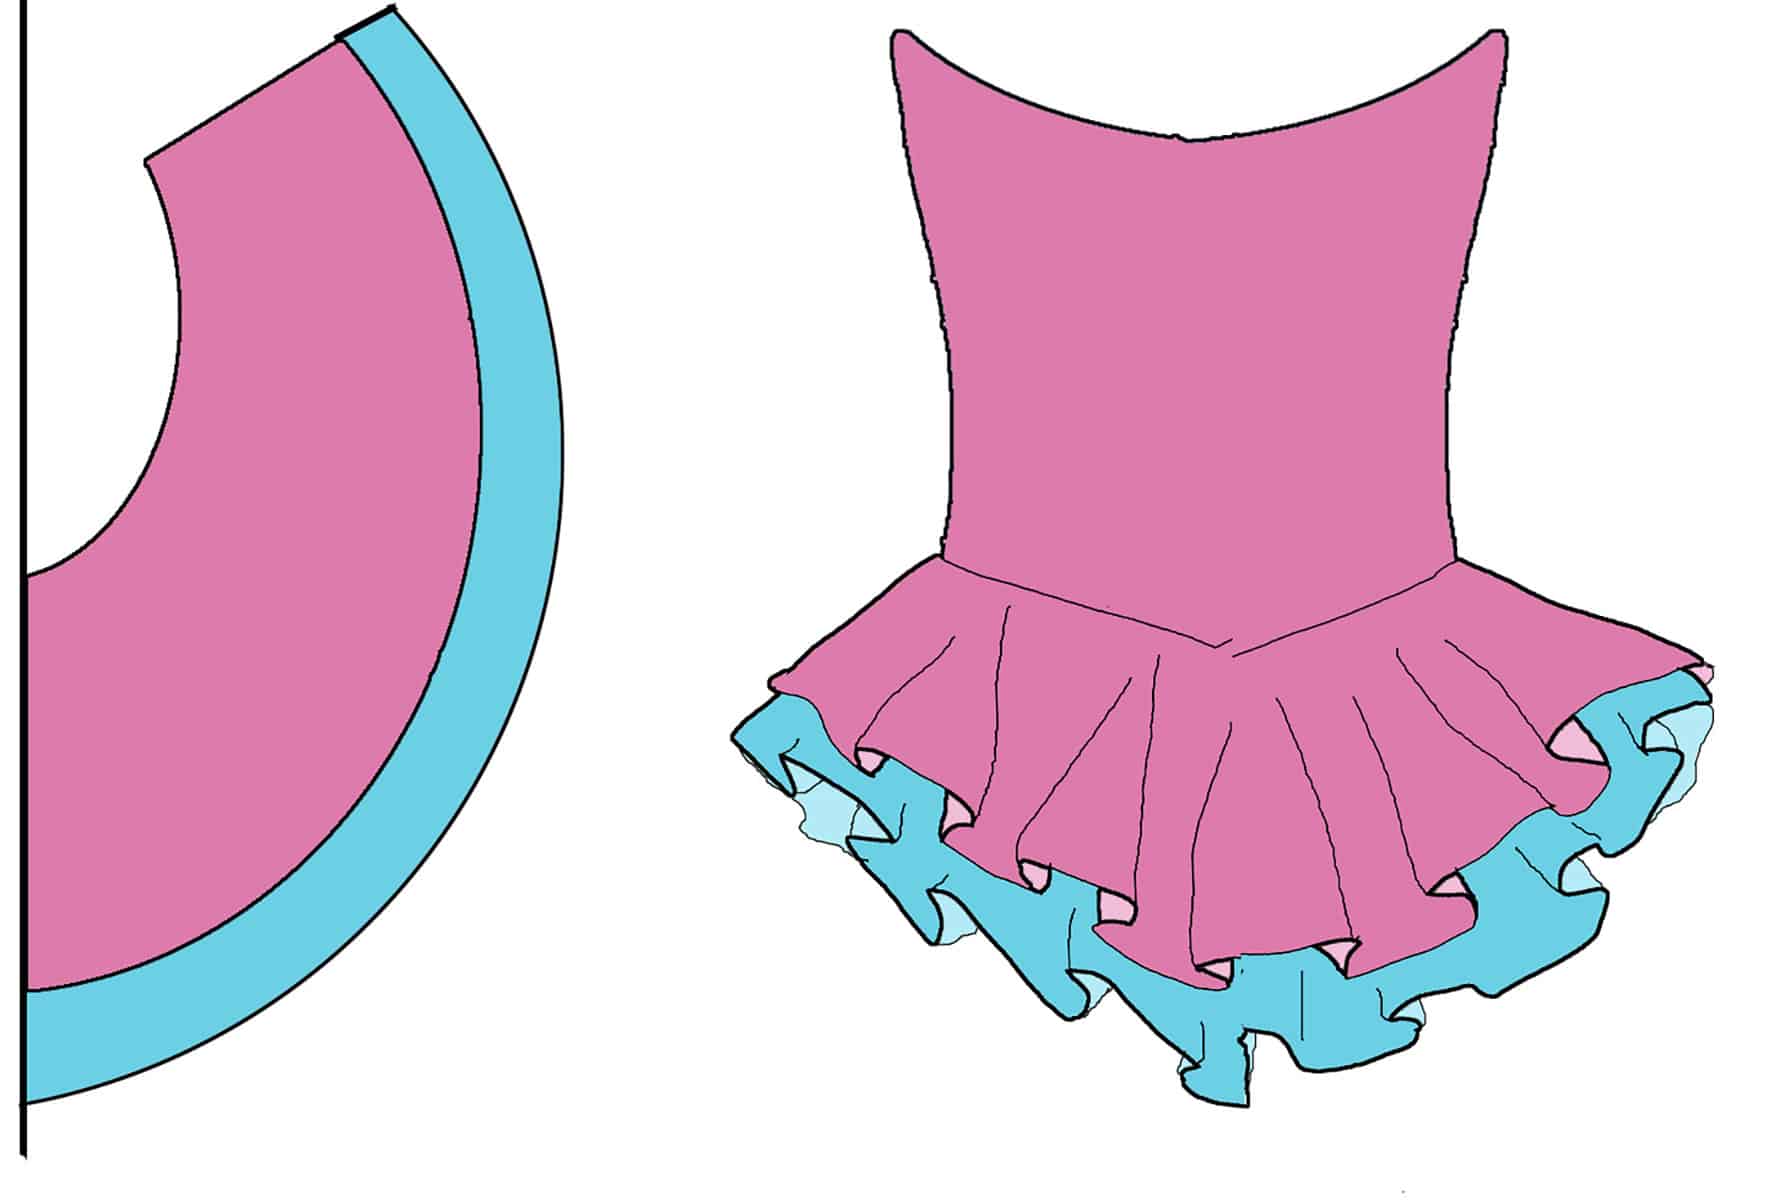 A sketch of a pink and blue layered skating skirt pattern, and how it would look as a skating dress.